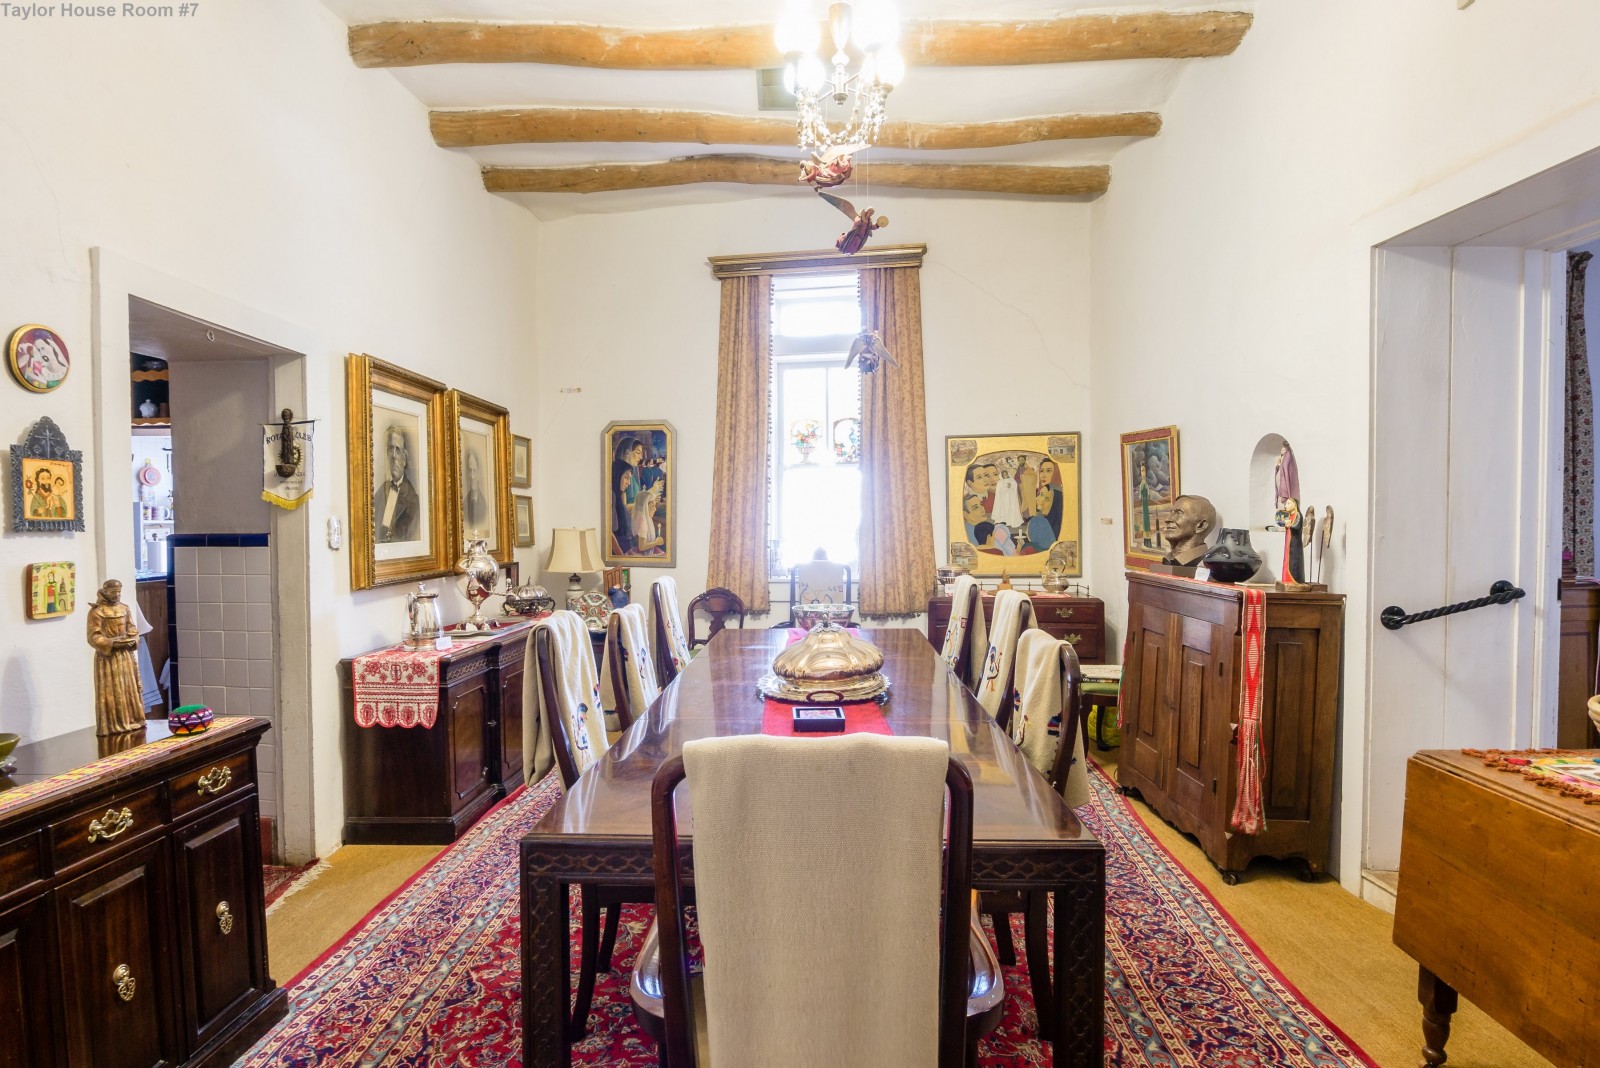 The Dining Room in the Taylor-Mesilla Historic Property. Photo by Tom Conelly.